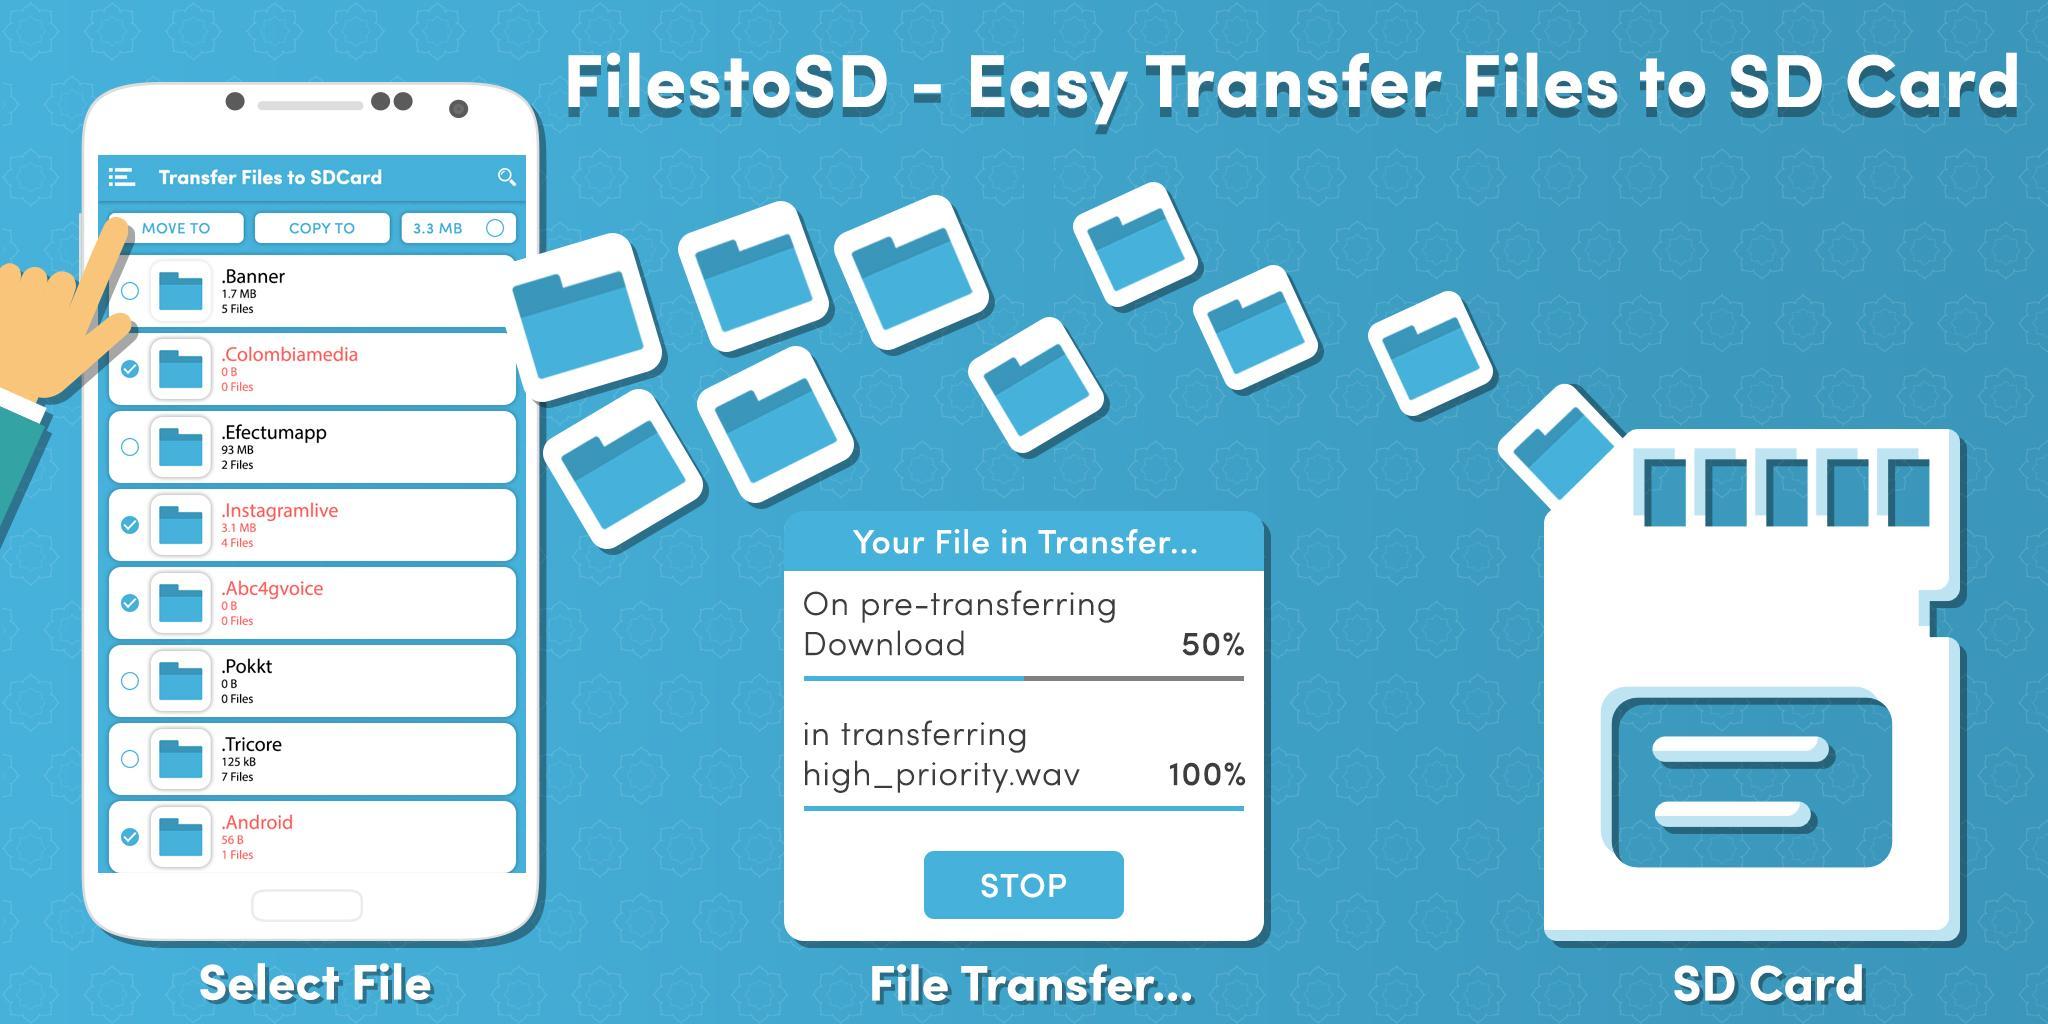 File transfer. File to SD Card. Transfer from Card to Card. We transfer передача файлов.